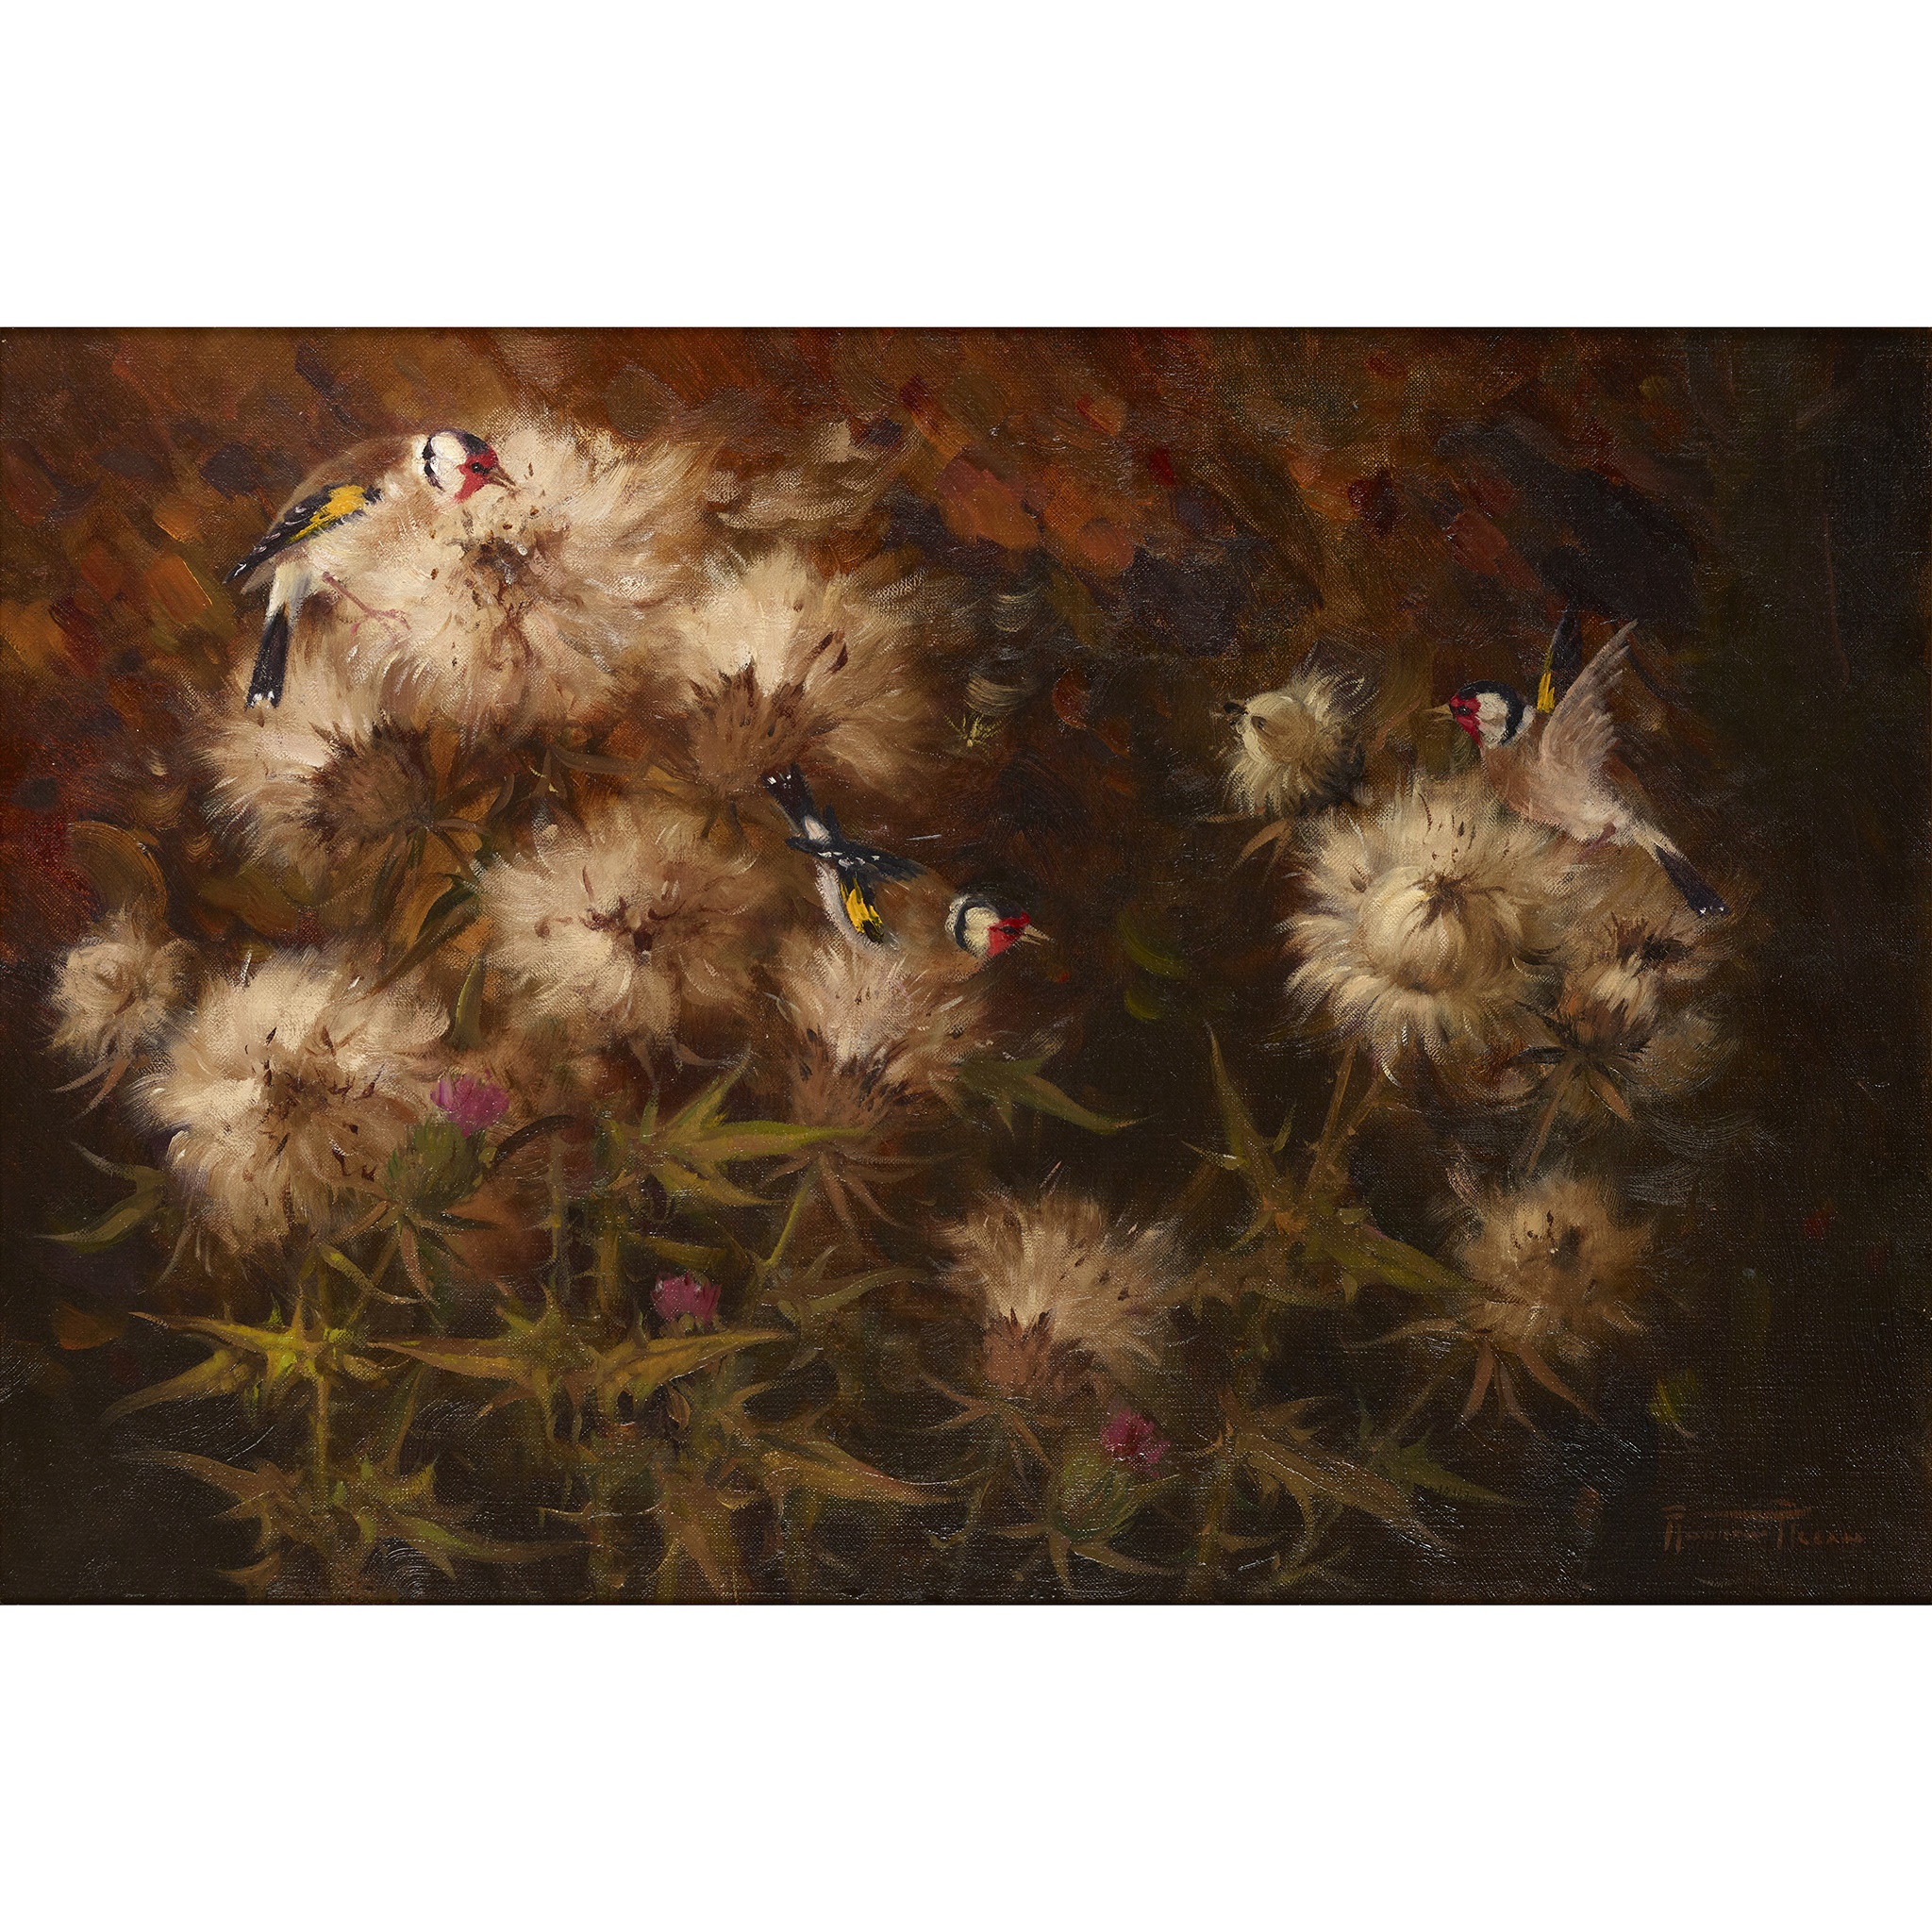 ANDREW ALLAN (SCOTTISH 1863-1940) THISTLEDOWN AND GOLDFINCHES